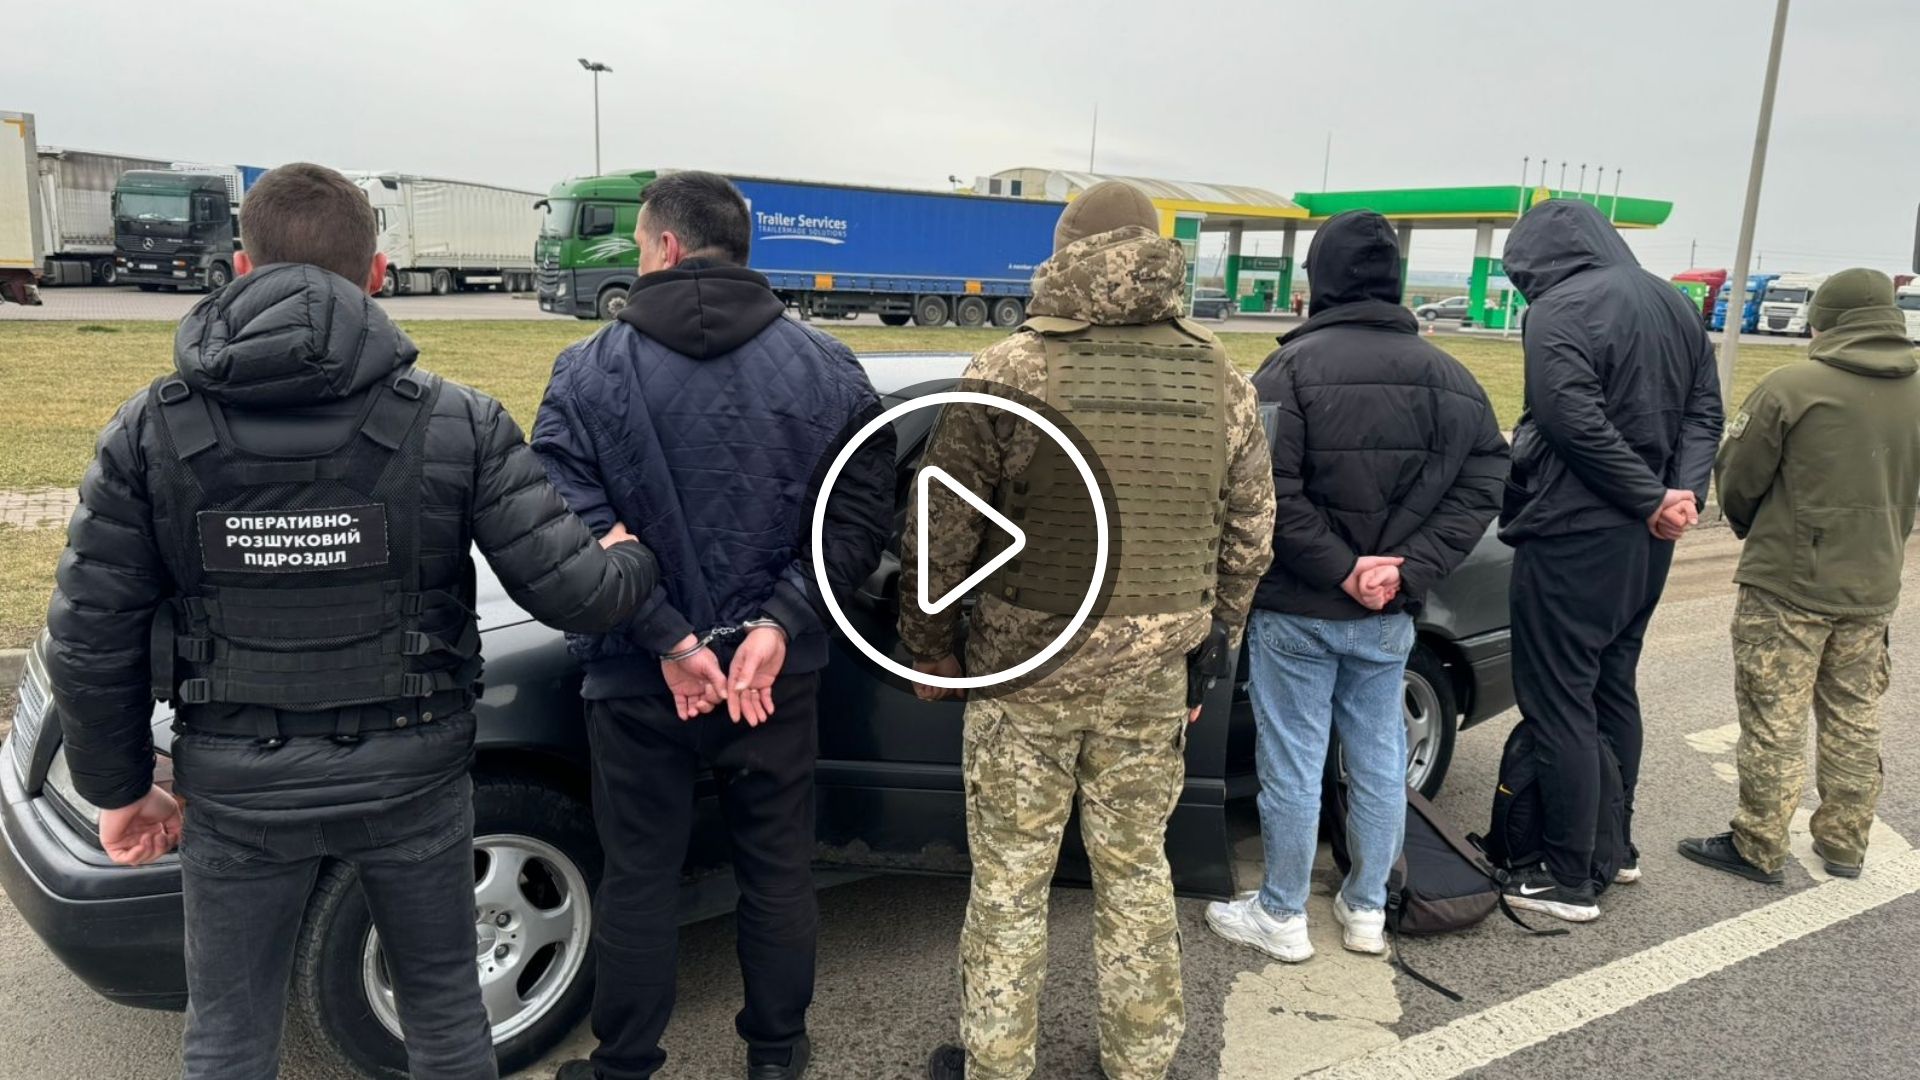 Border guards of the Chernivtsi detachment detained two men near the border with Romania, who paid 9,000 euros each for an illegal route that they could not overcome.